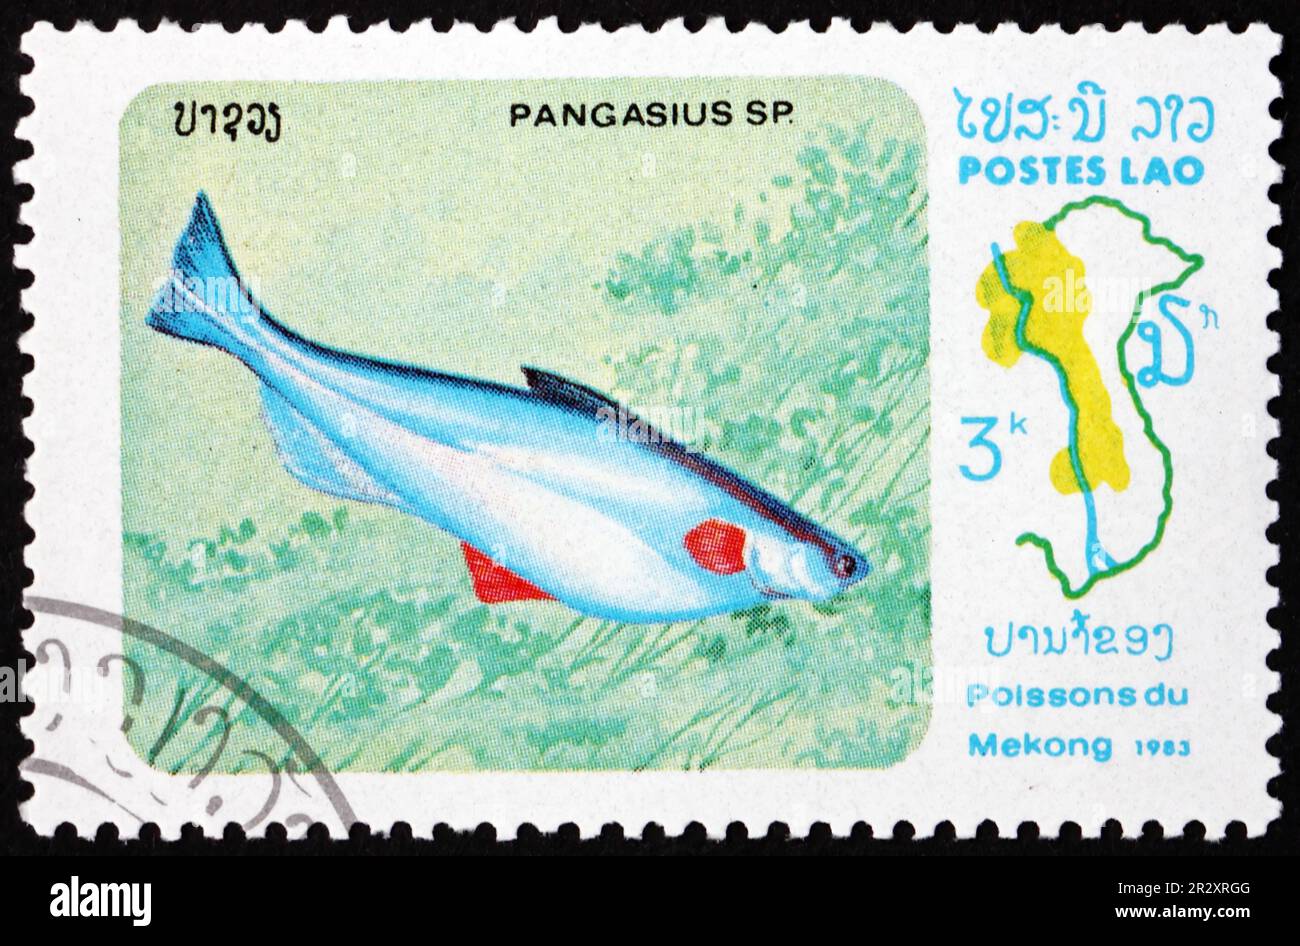 LAOS - CIRCA 1983: a stamp printed in Laos shows shortbarbel pangasias, pangasius micronemus, is a freshwater fish native to South Asia, circa 1983 Stock Photo